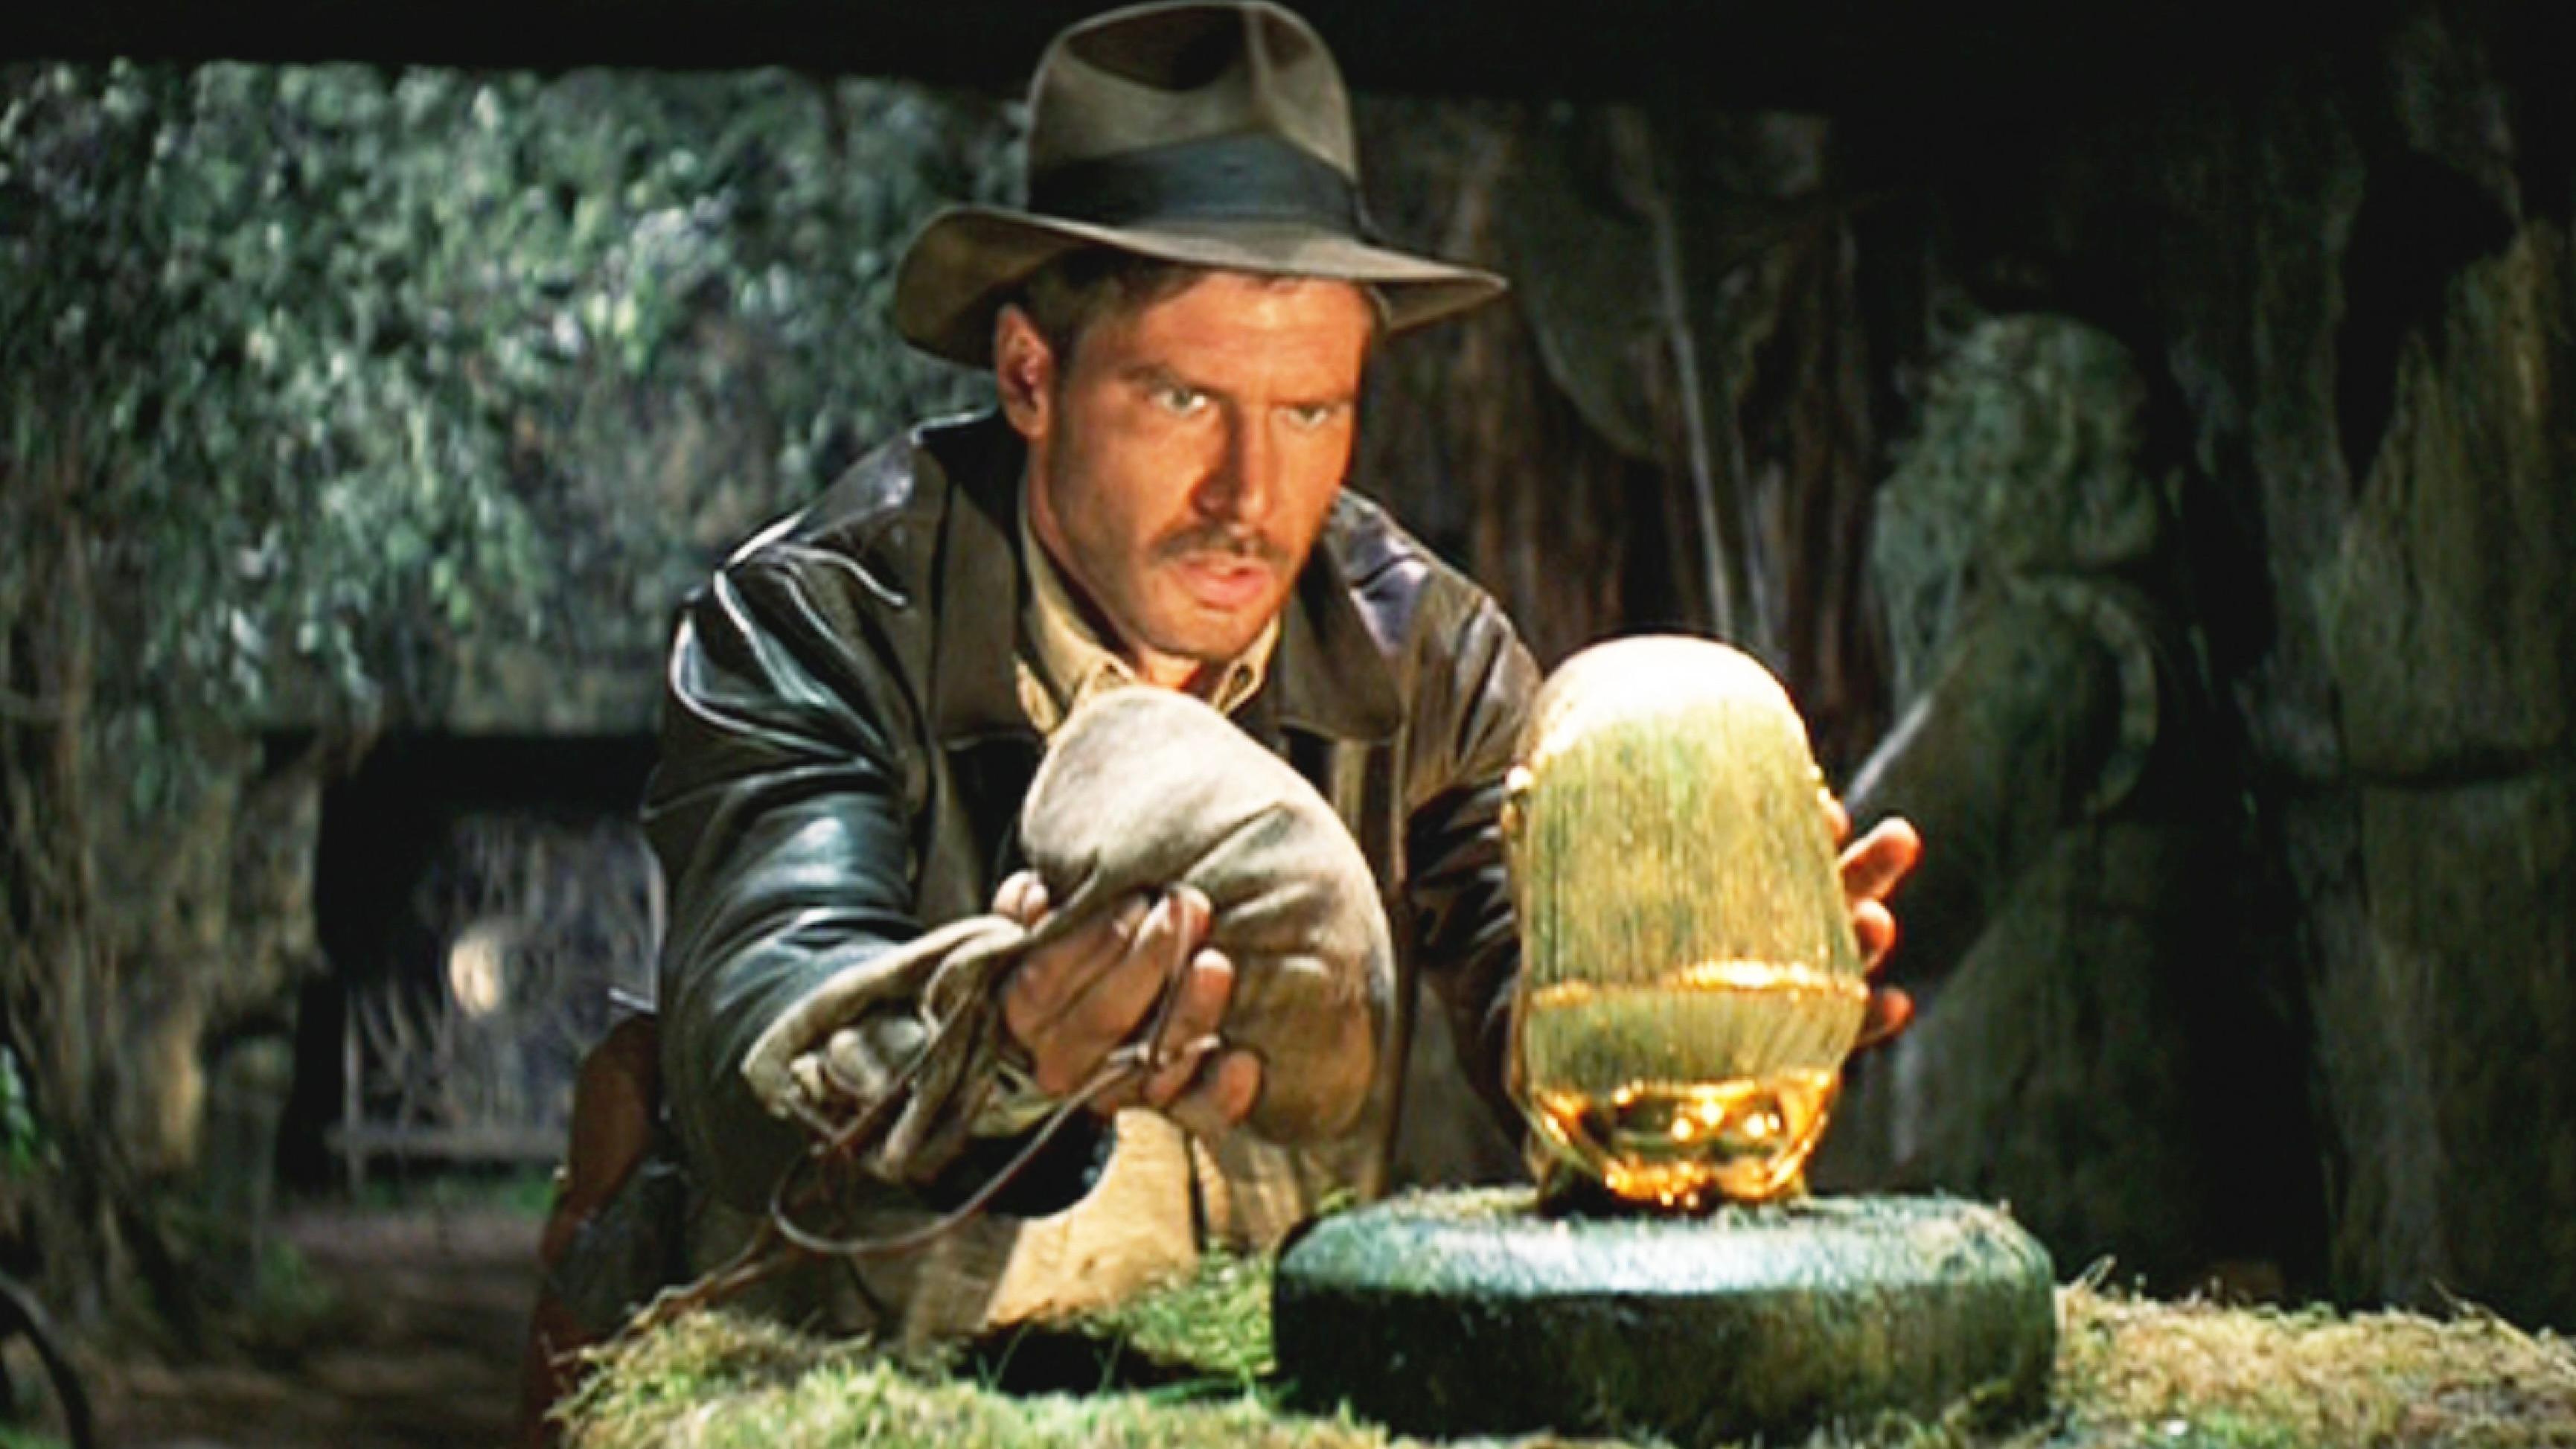 Harrison Ford in Indiana Jones Raiders of the Lost Ark